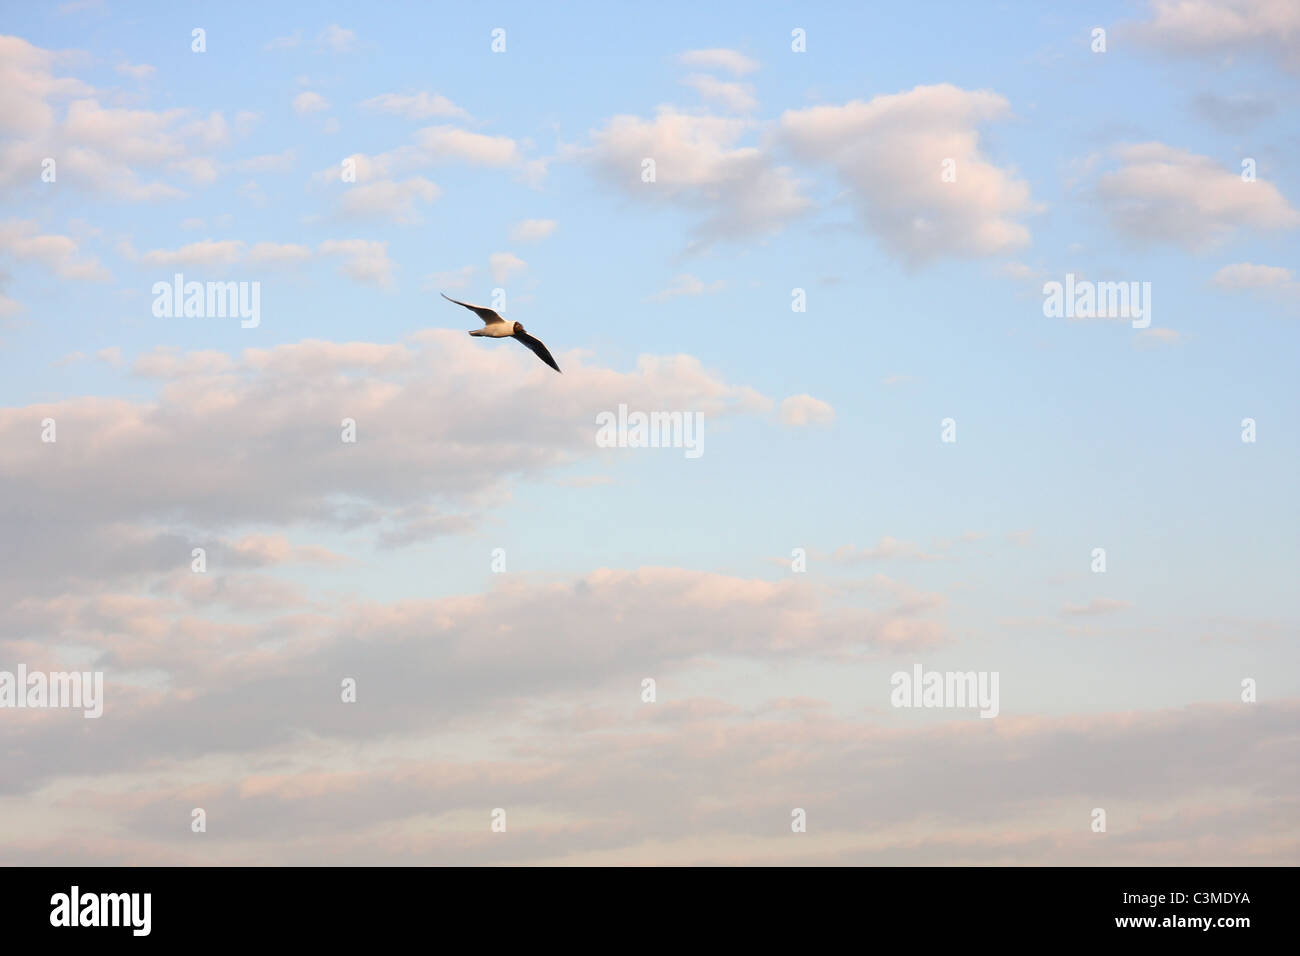 Blue sky with clouds and a bird Stock Photo